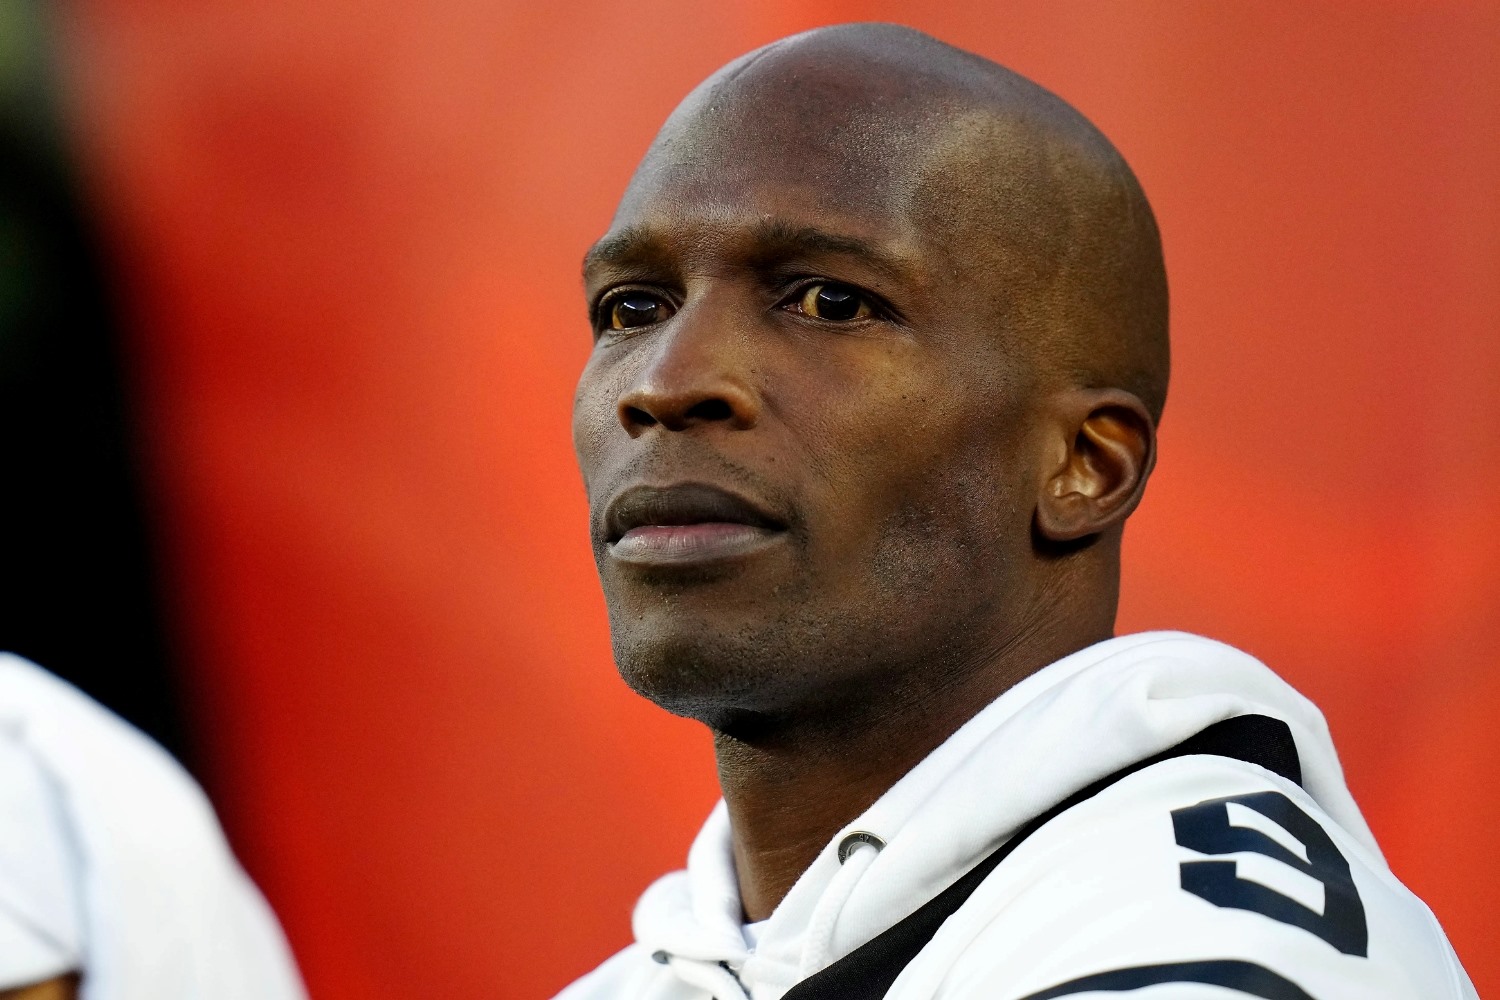 21-intriguing-facts-about-chad-ochocinco-johnson